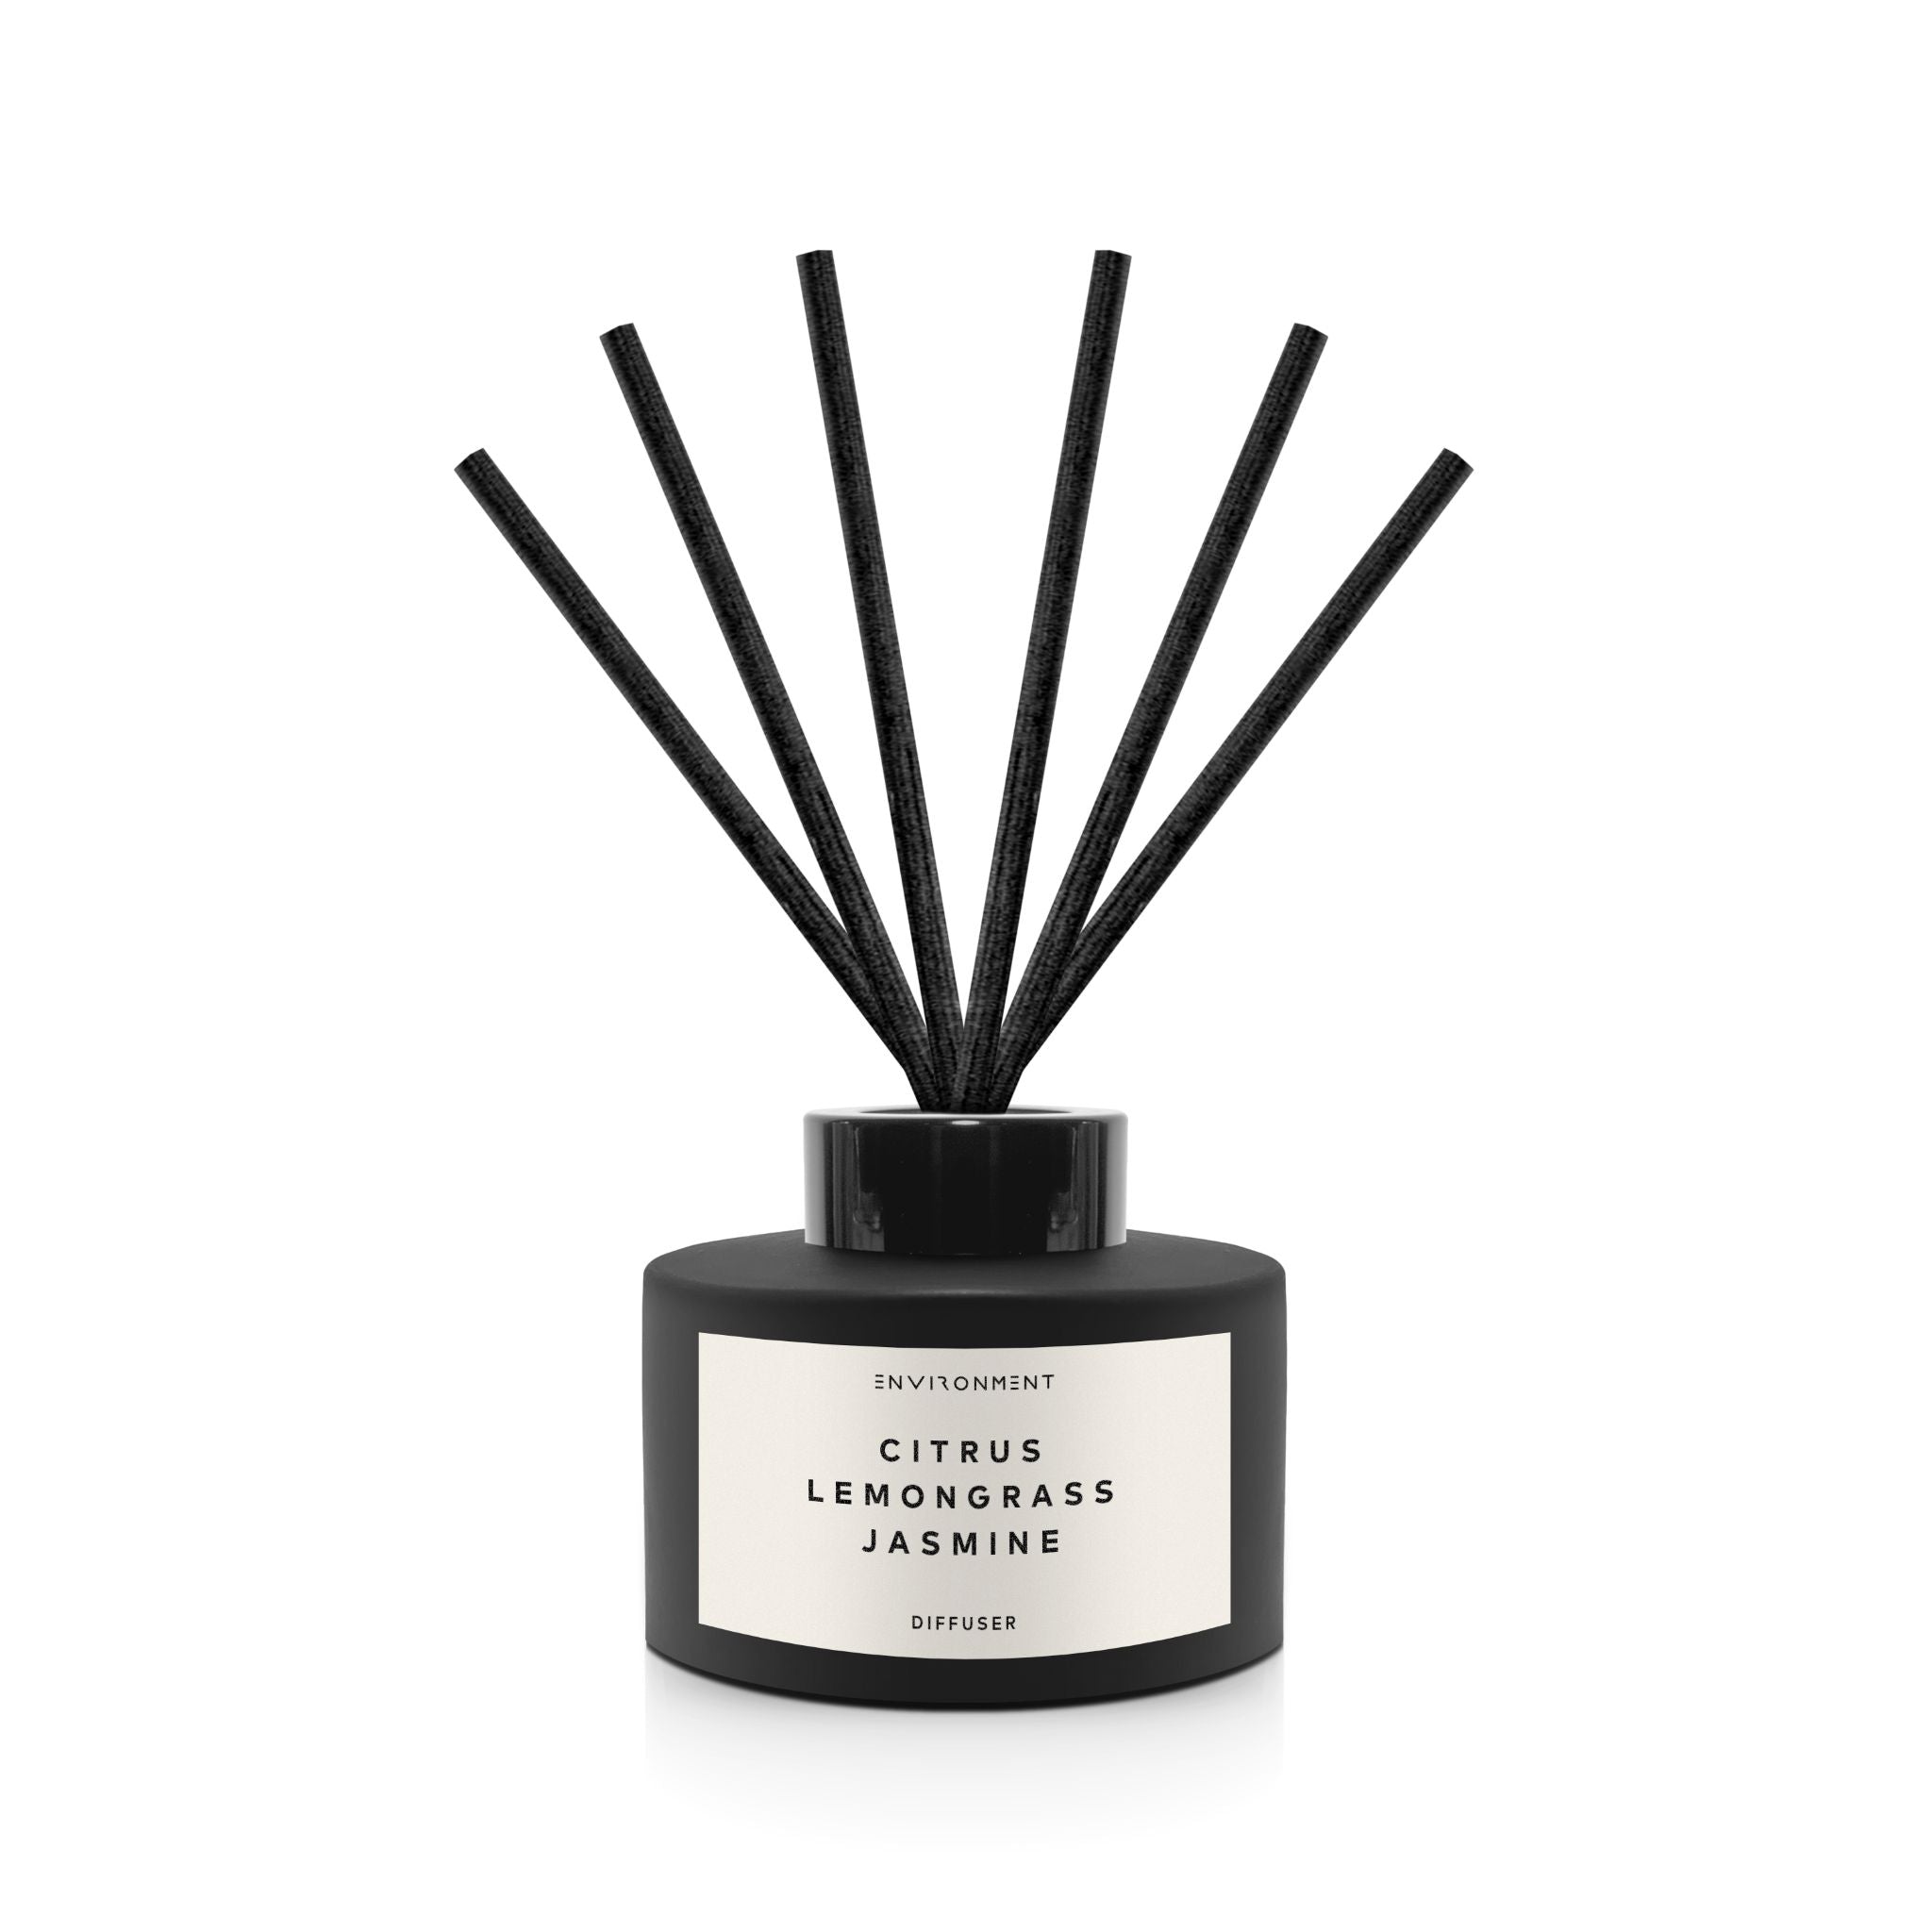 Citrus | Lemongrass | Jasmine 200ml Diffuser and 8oz Candle Gift Pack (Inspired by W Hotel®)